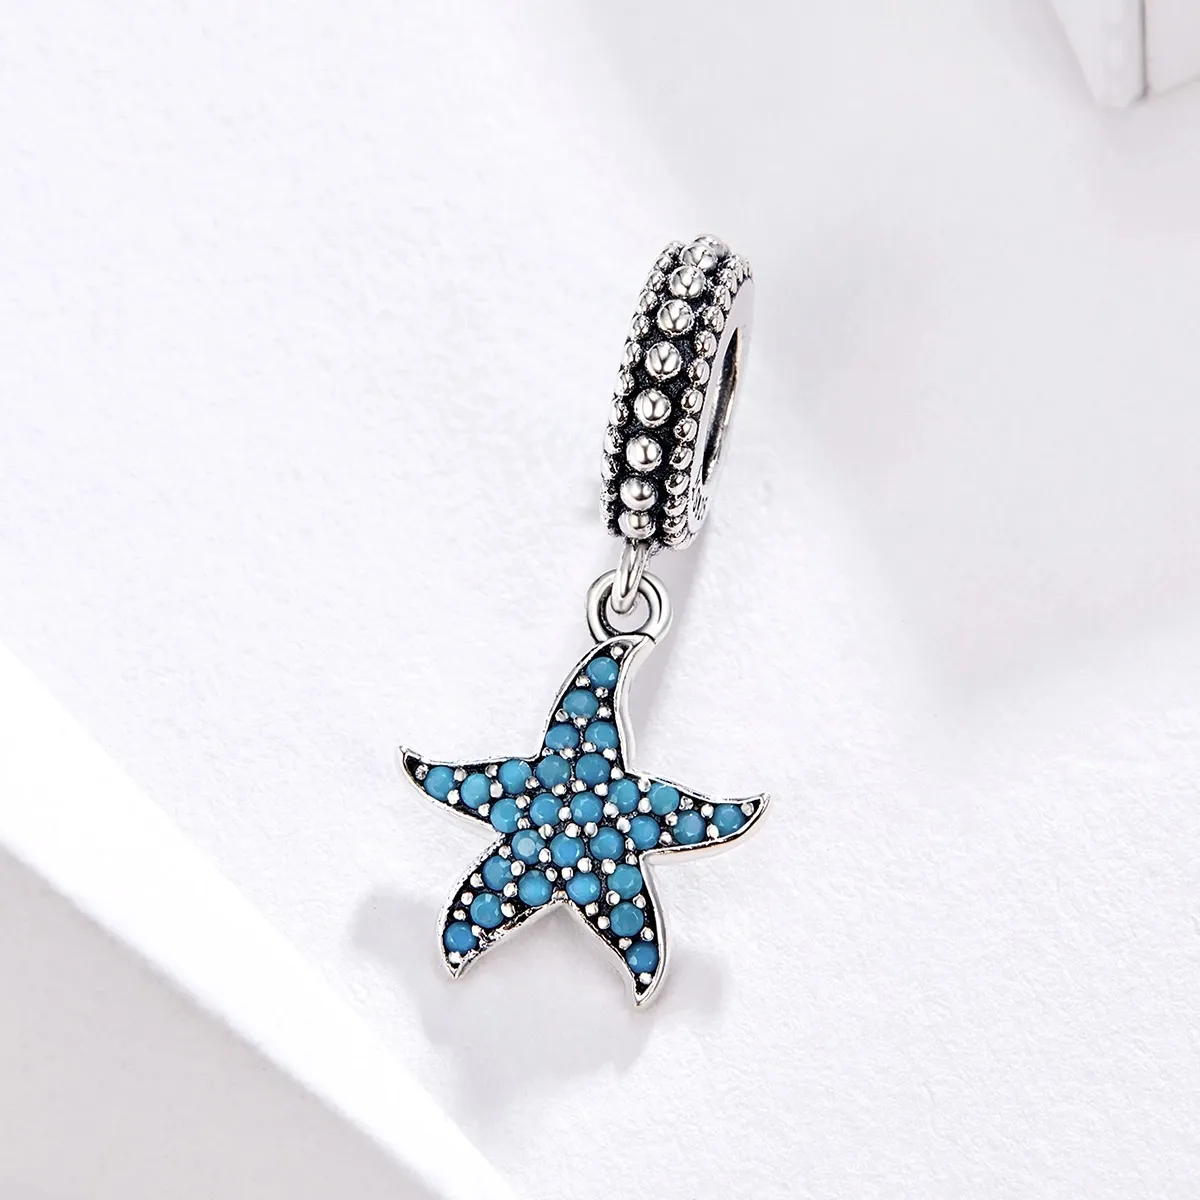 50/100Pc Mini Starfish Glass Crystal Charm Pendant Drop For Necklace Accessories 